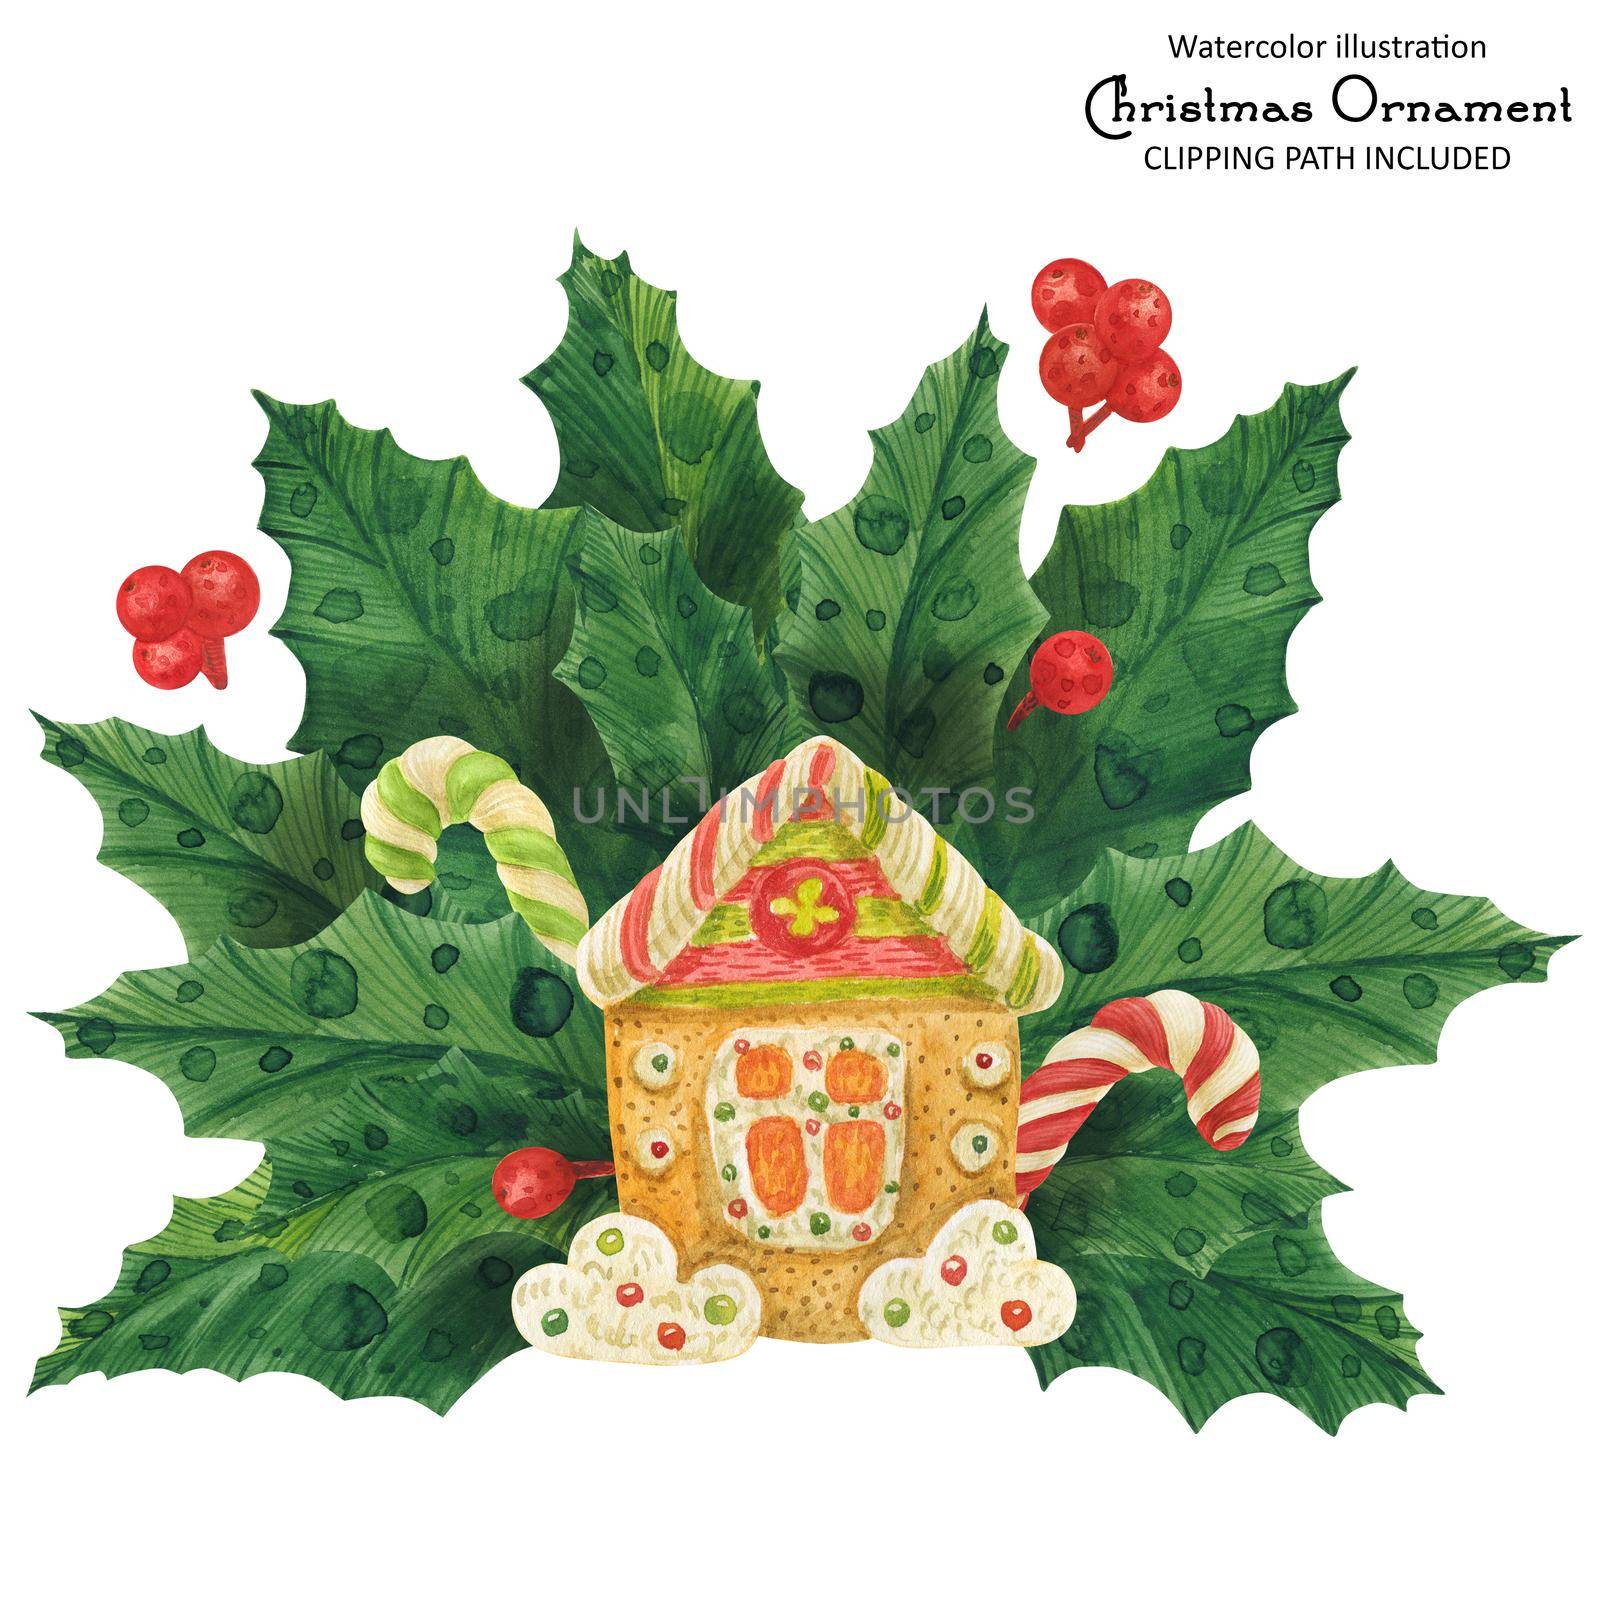 Christmas holly bouquet with gingerbread house, watercolor illustration by Xeniasnowstorm